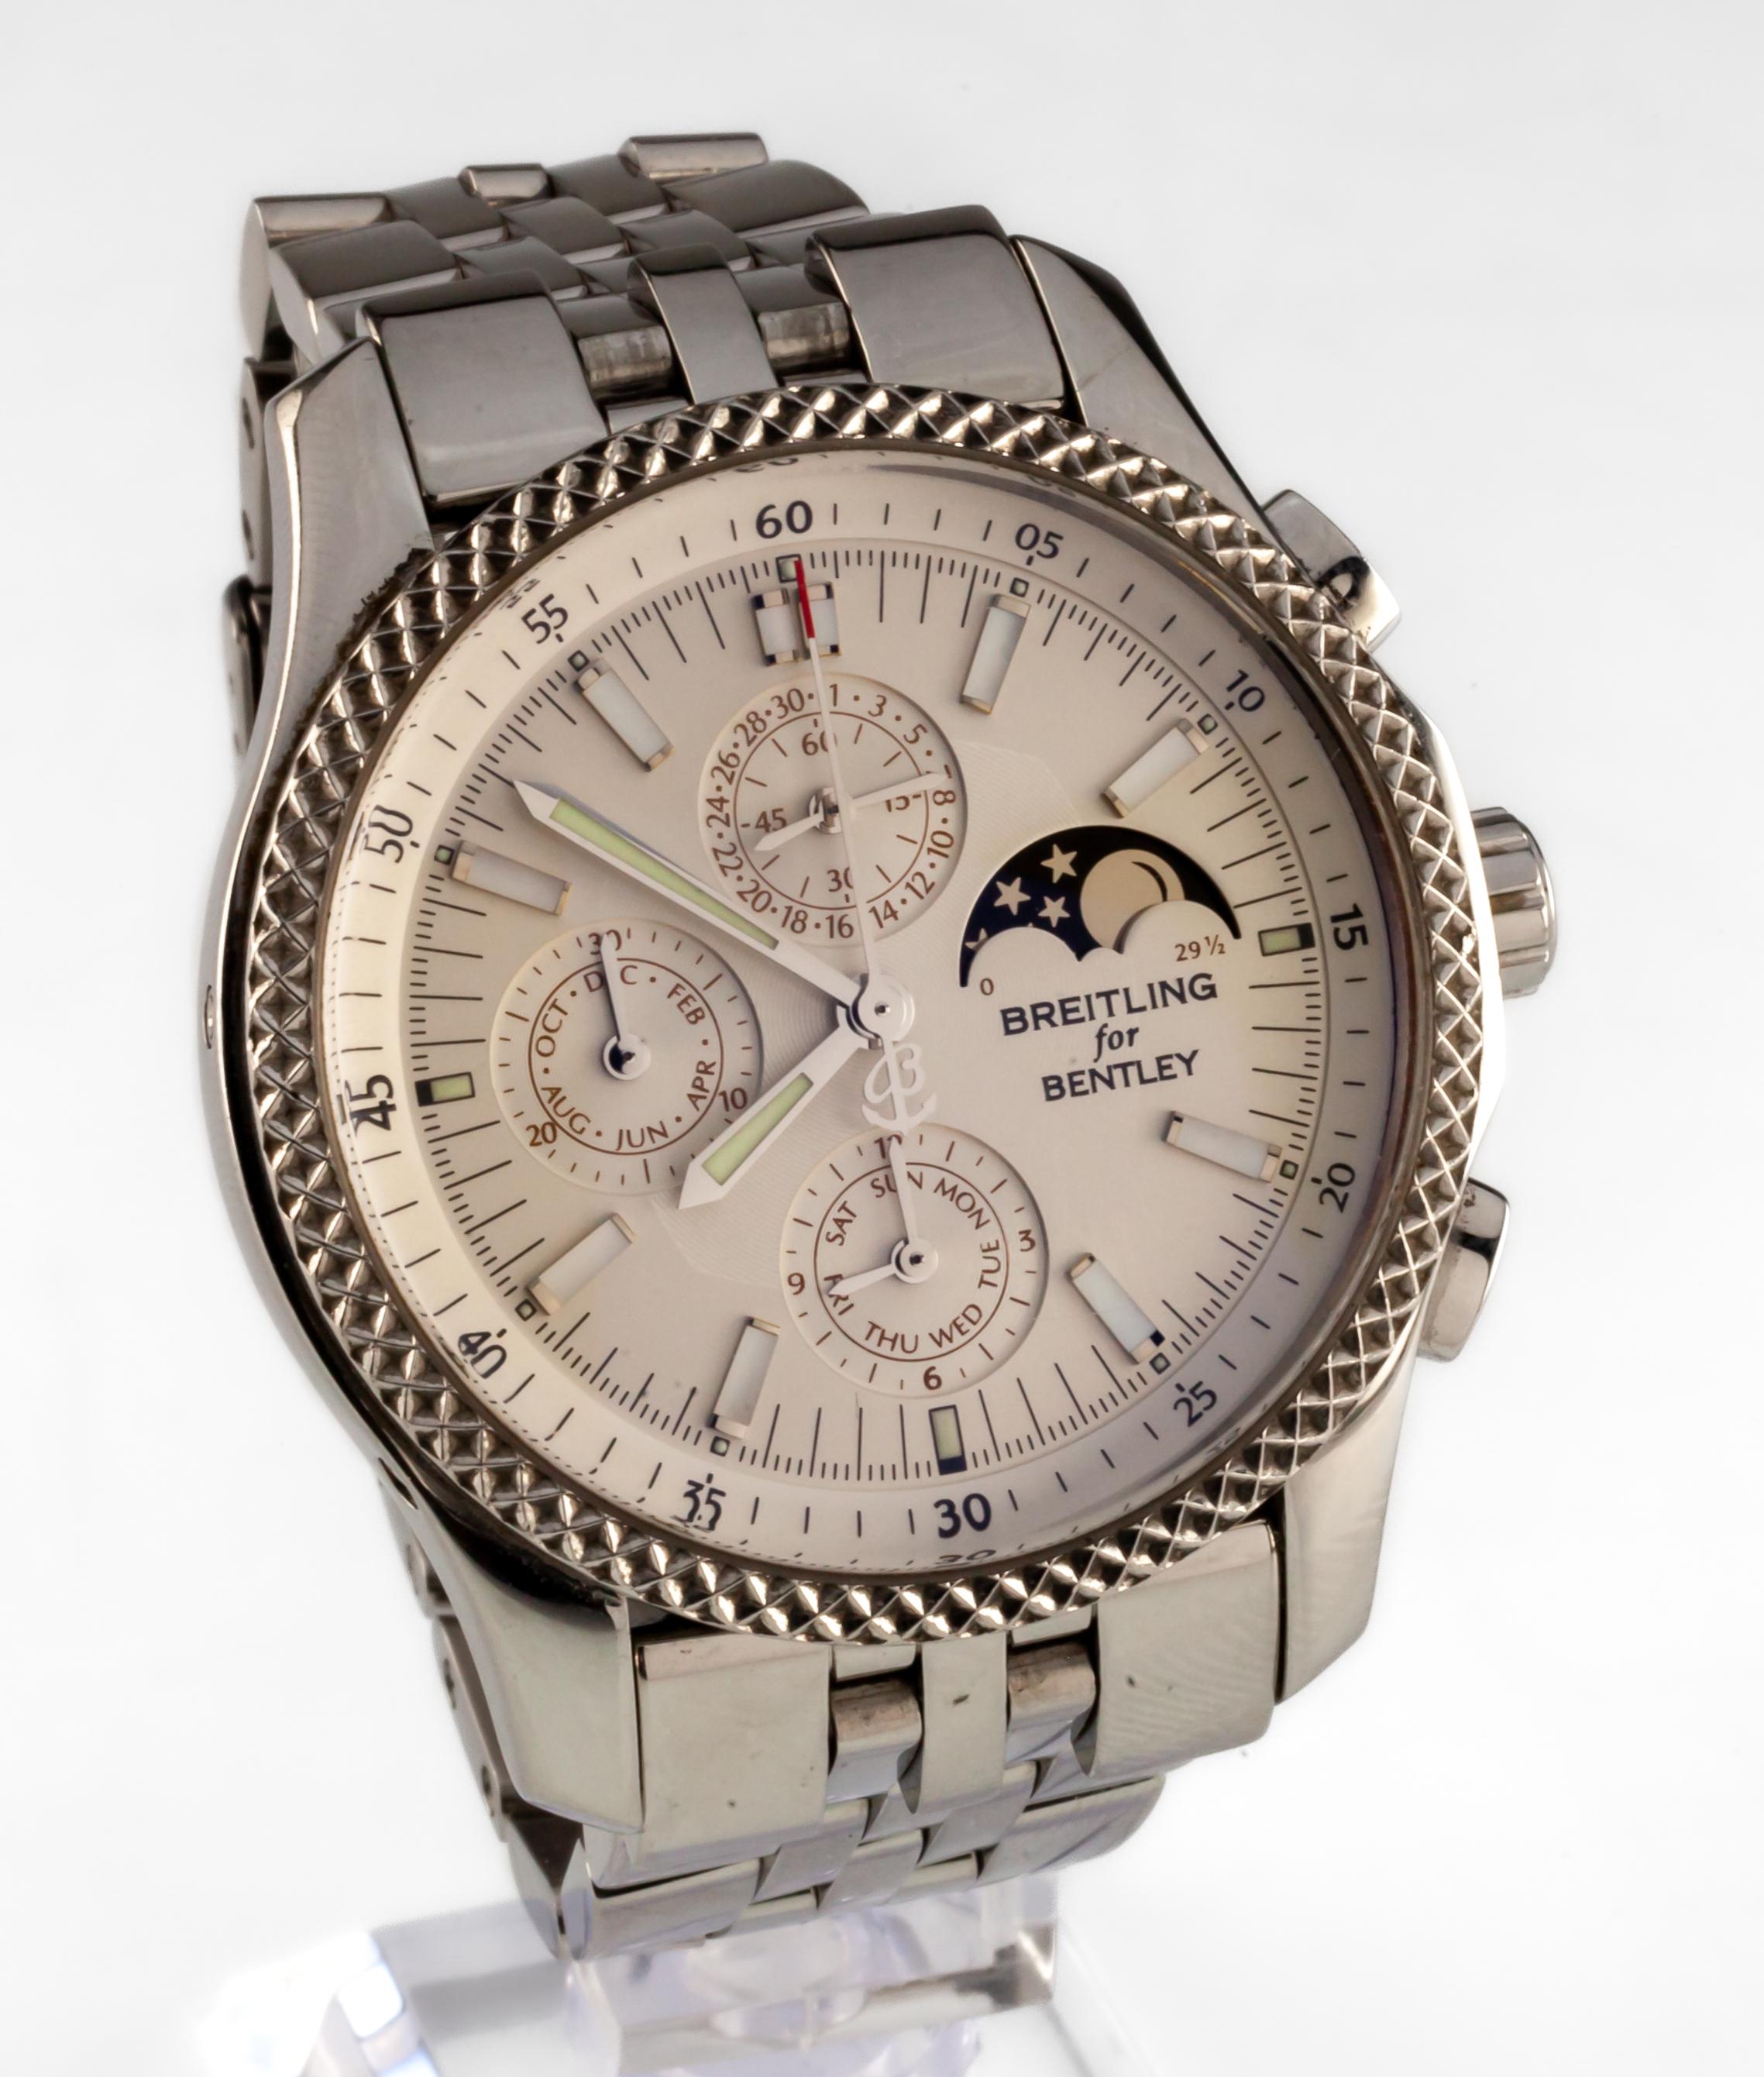 Breitling for Bentley Mark VI Chronograph Moonphase SS Watch Extra Band P19362
Model #P19362
Movement #2892-A2
21 Jewels
Serial #2282493
Round Stainless Steel Case
41 mm in Diameter (44 mm w/ Crown)
Lug-to-Lug Distance = 50 mm
Lug-to-Lug Width = 22